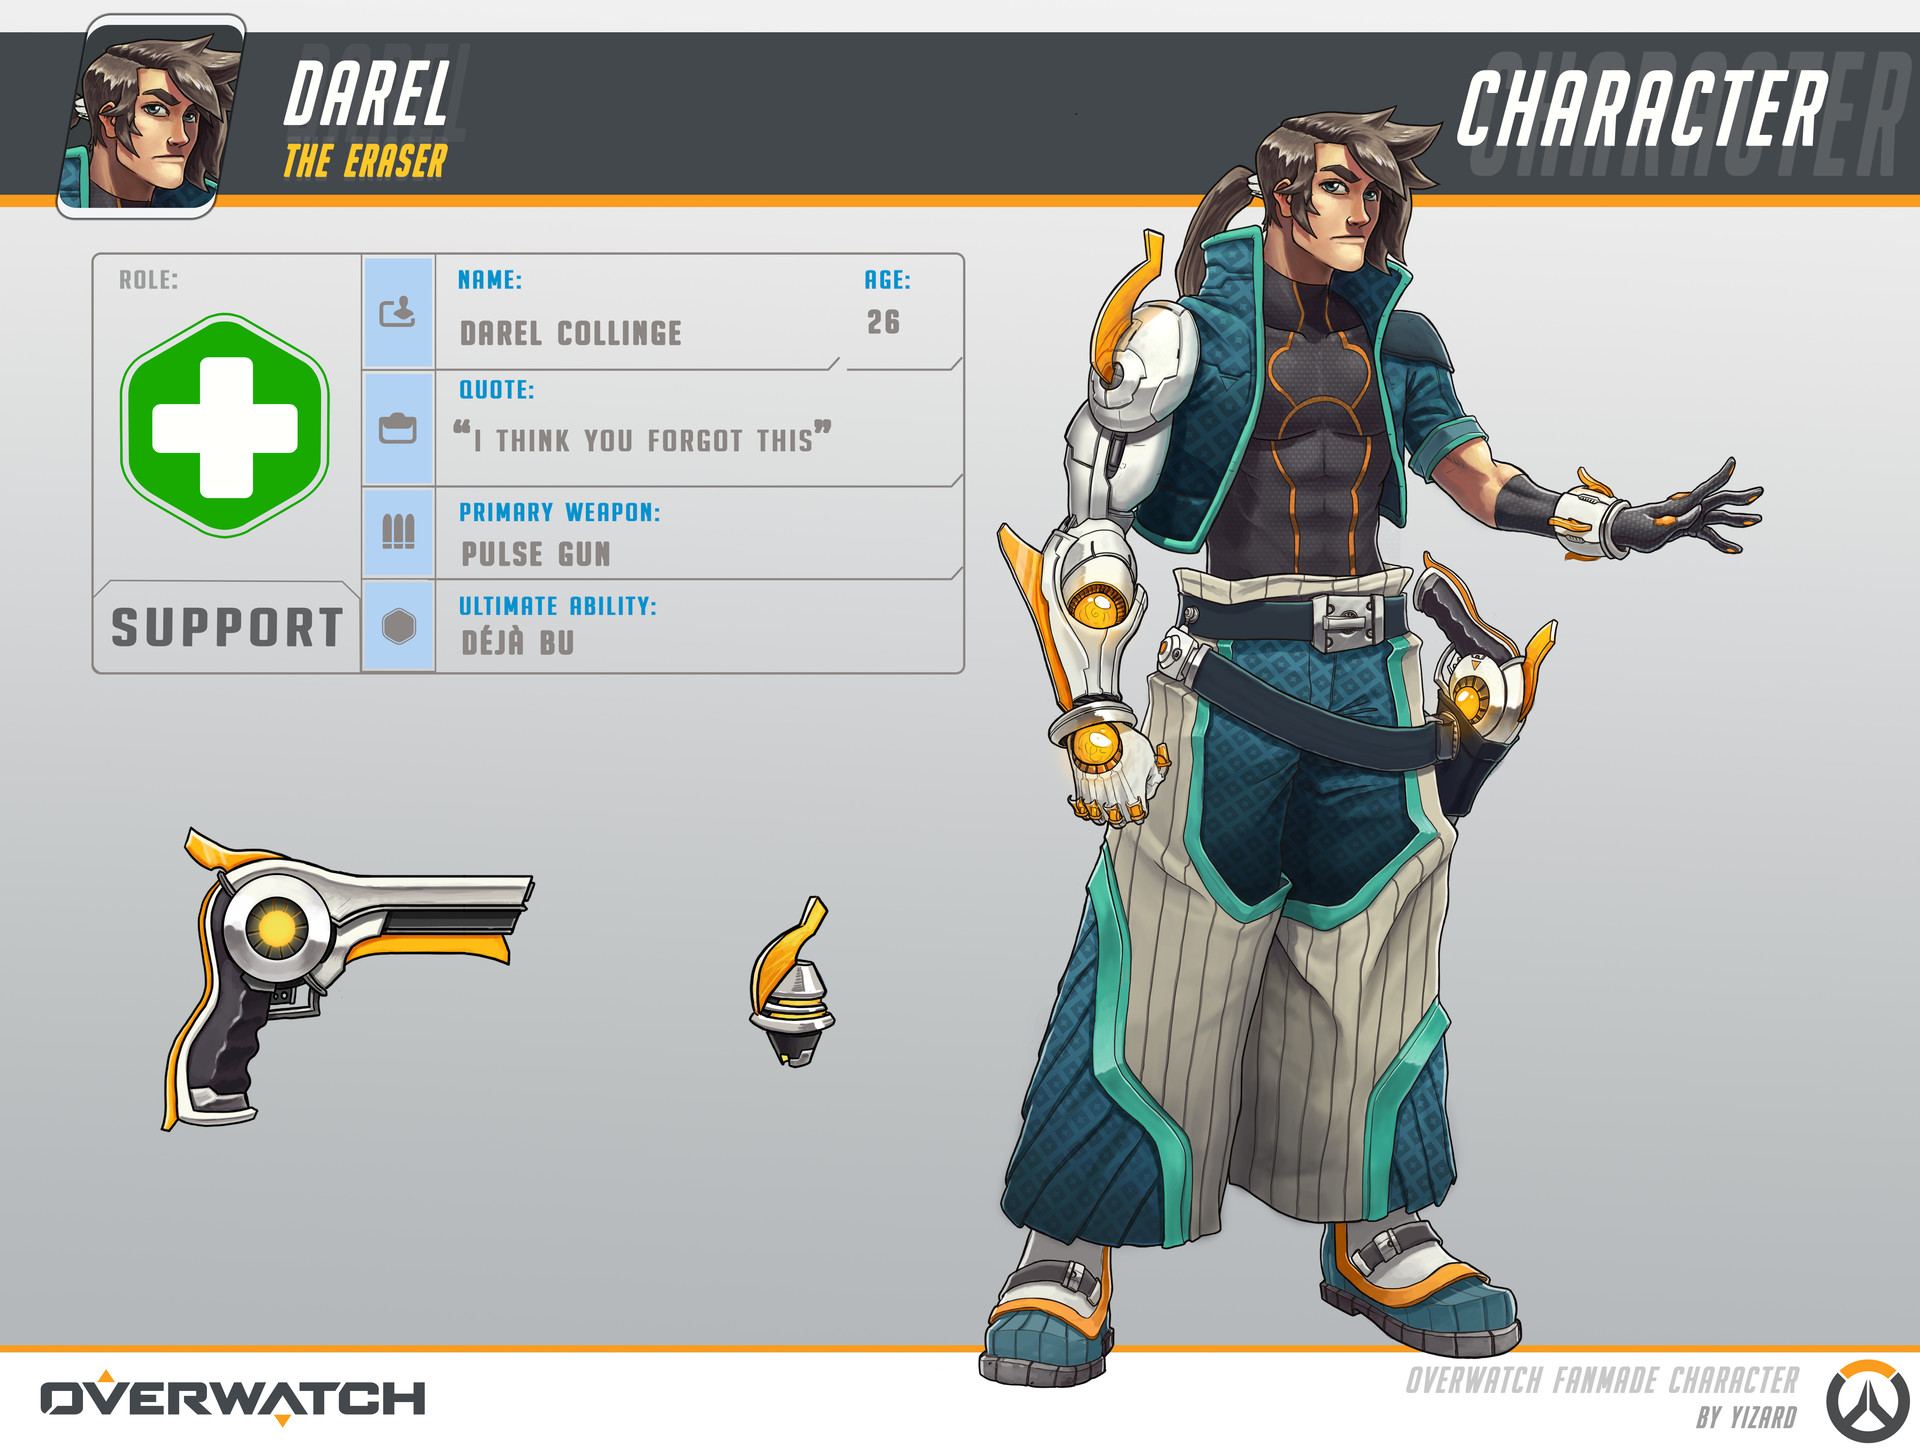 Darel "the eraser" (Fan-made Character for Overwatch) .